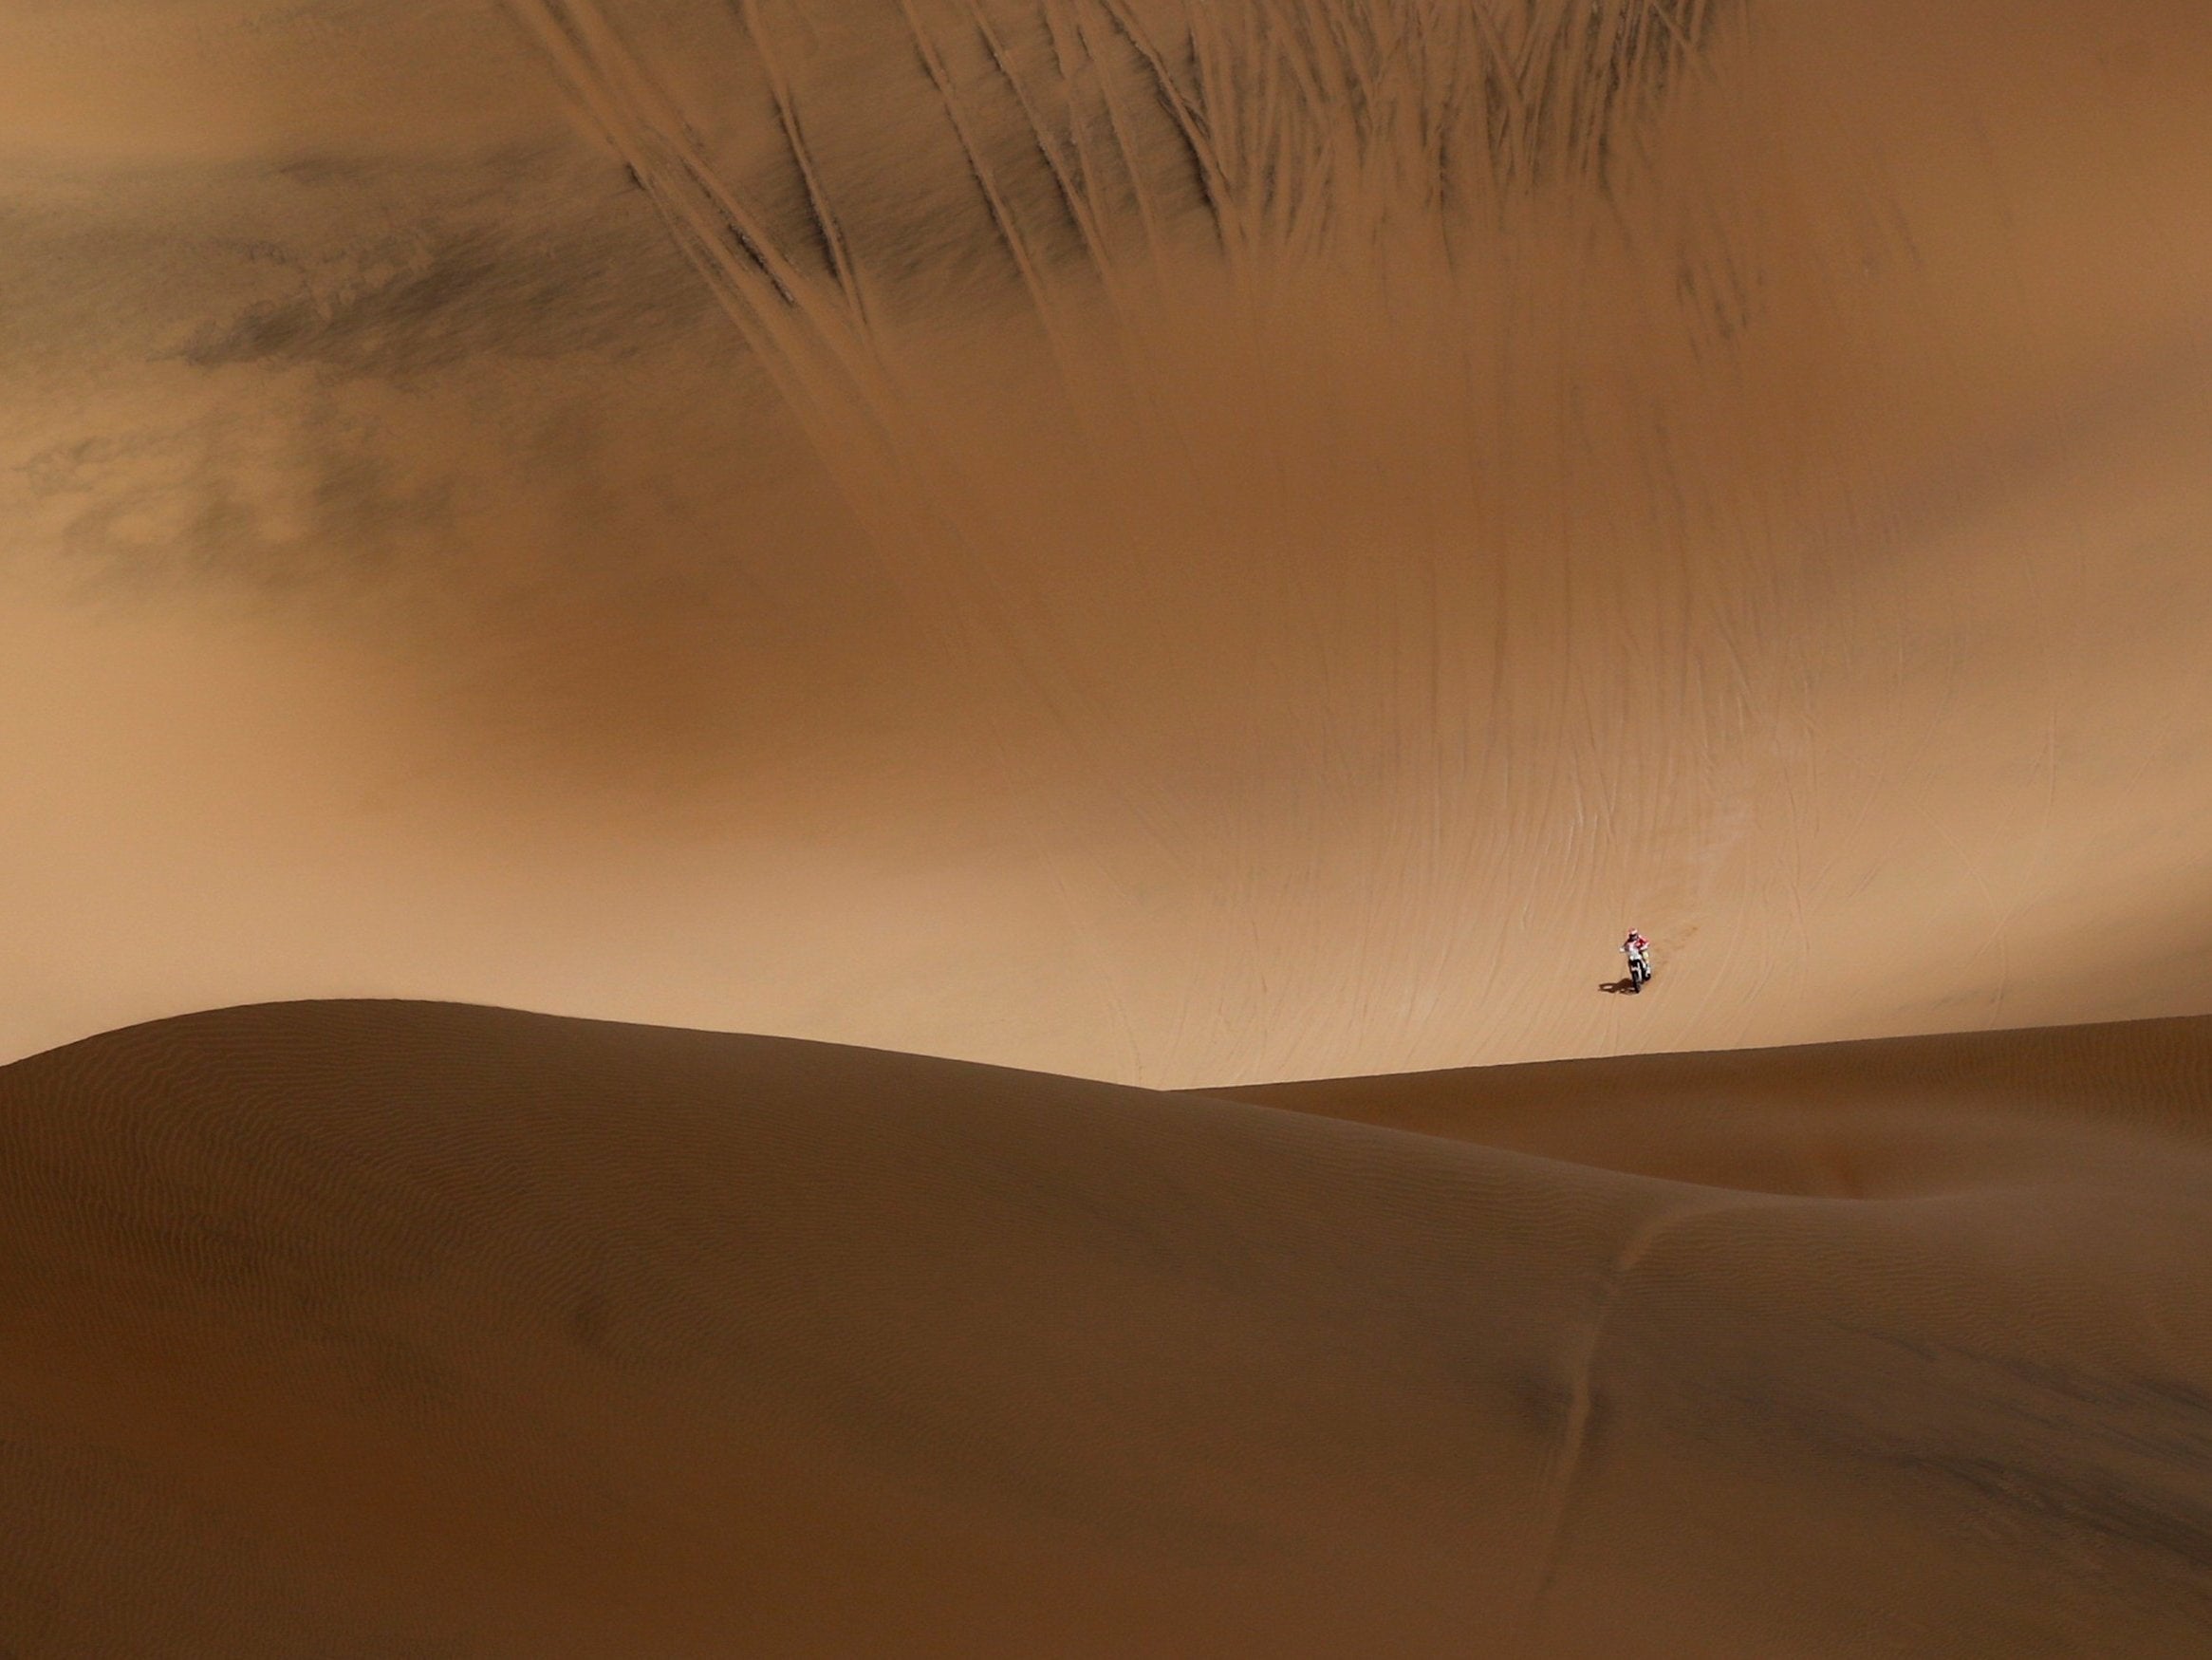 A rider crosses sand dunes during Stage 5, from Tacna to Arequipa, of the Dakar Rally in Peru